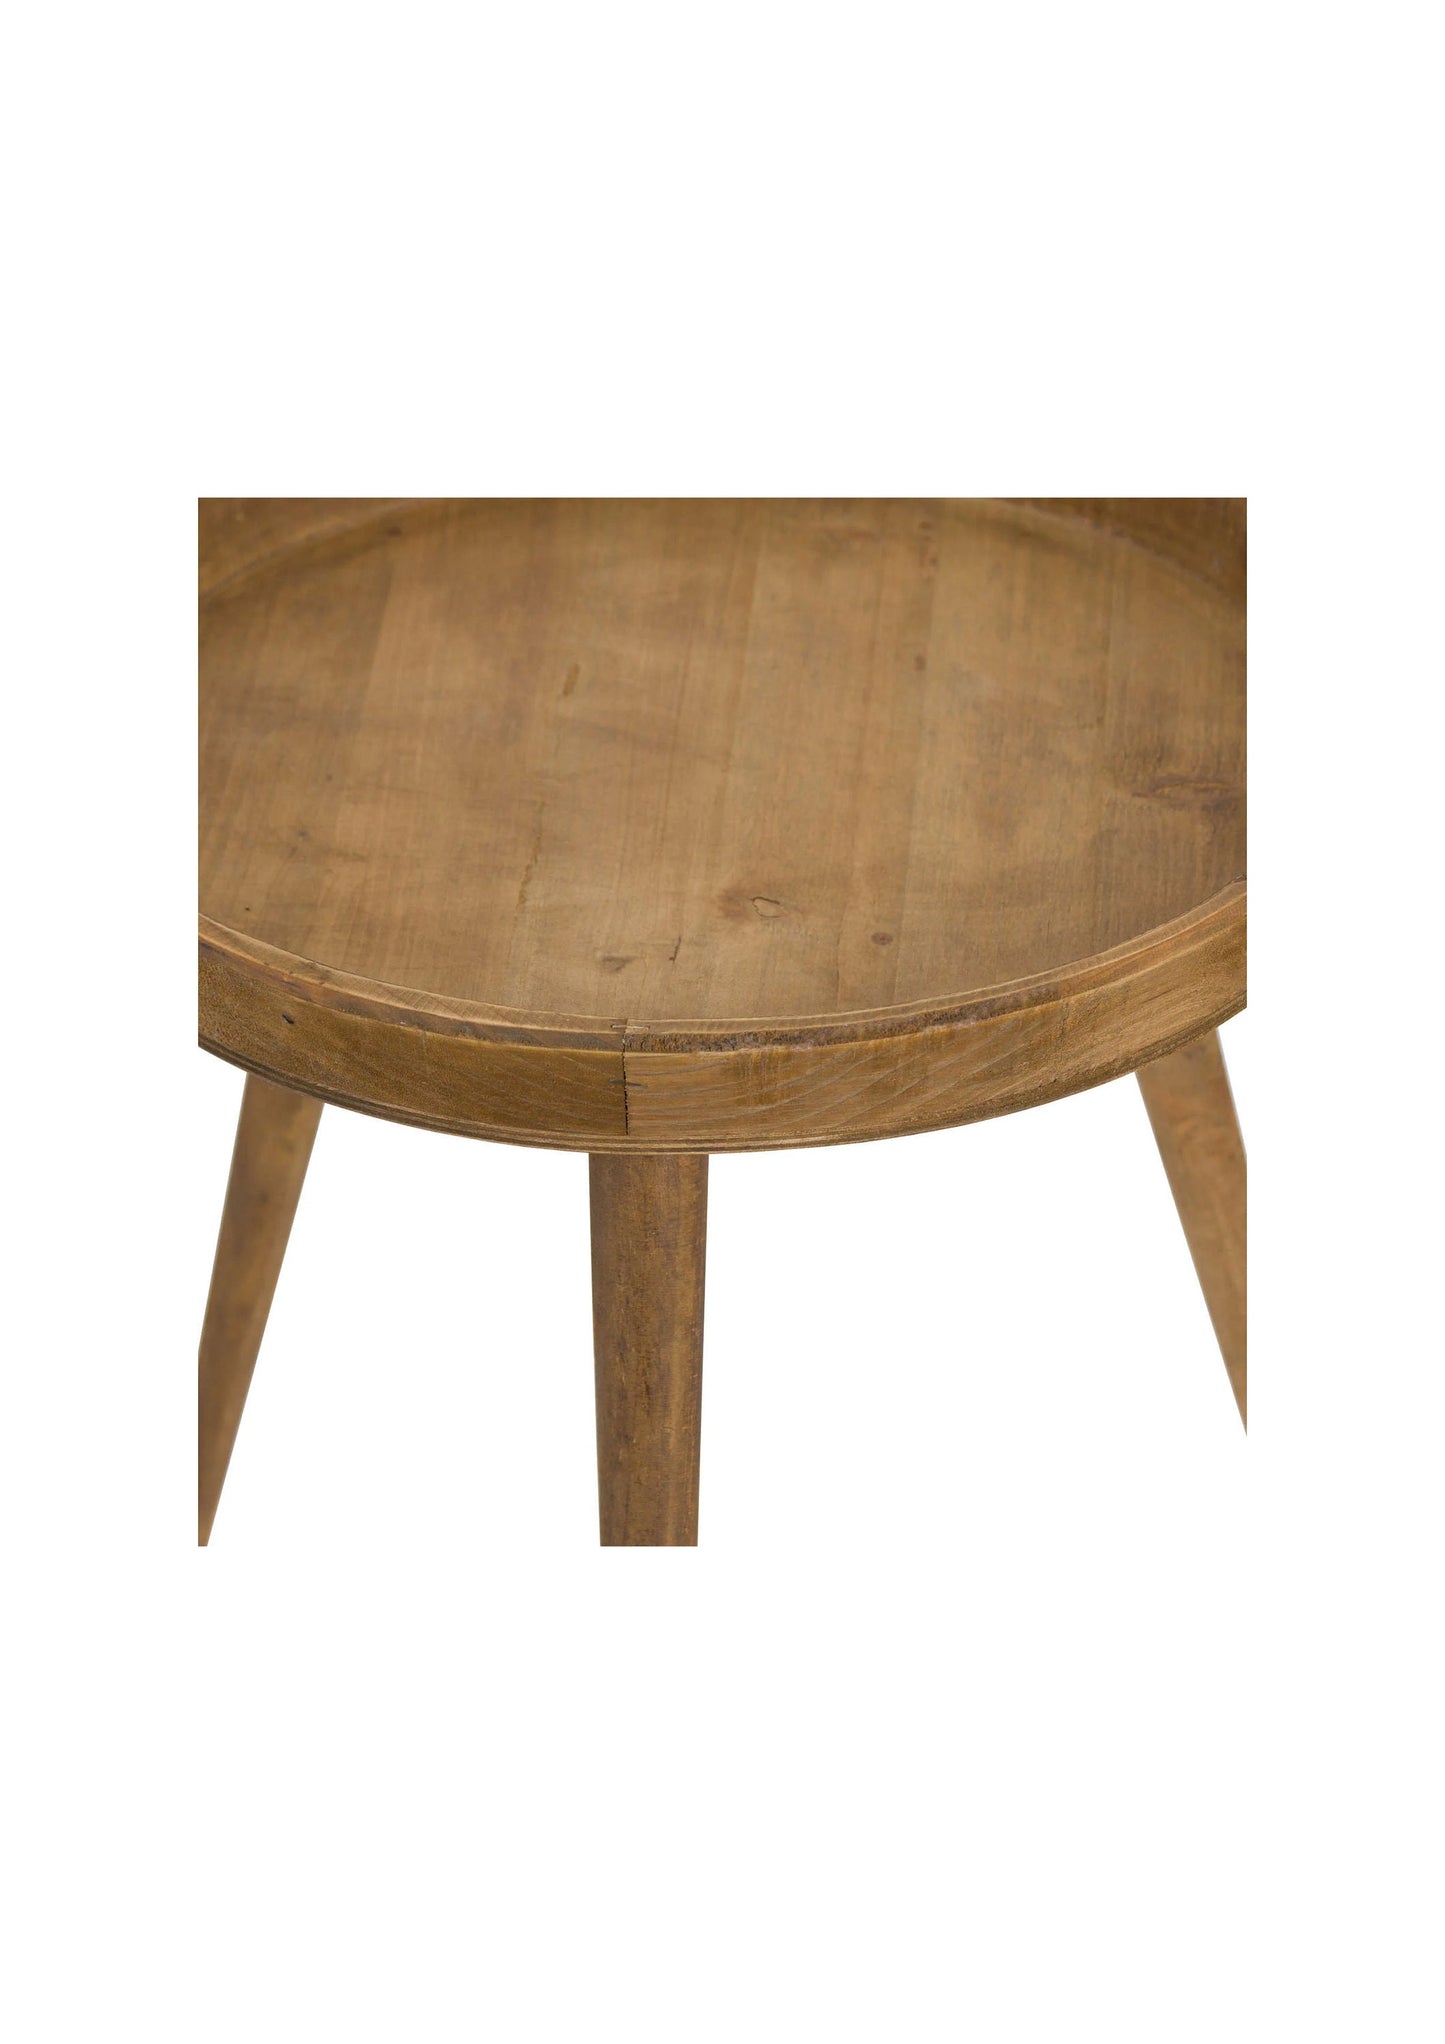 Set Of 3 Round Wooden Table